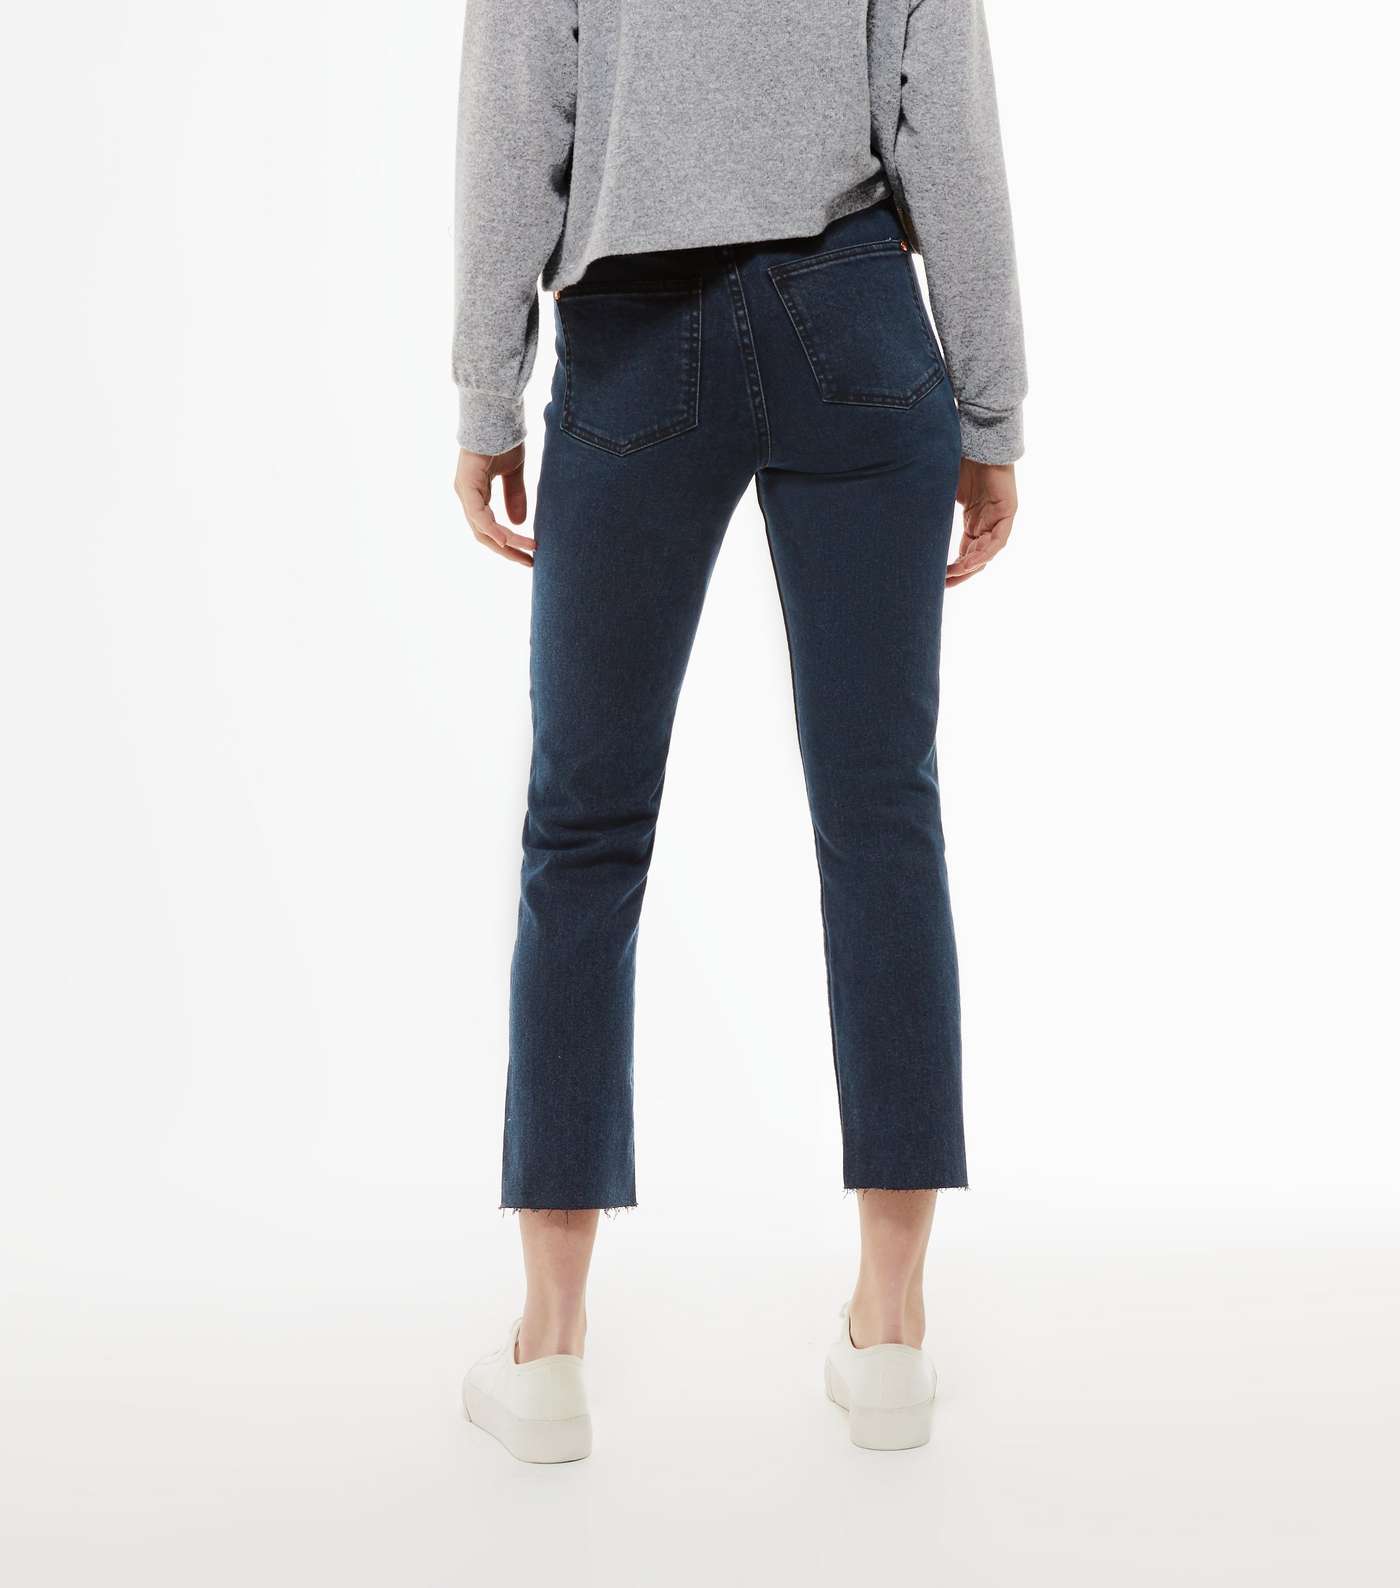 Navy Ankle Grazing Hannah Straight Leg Jeans Image 3